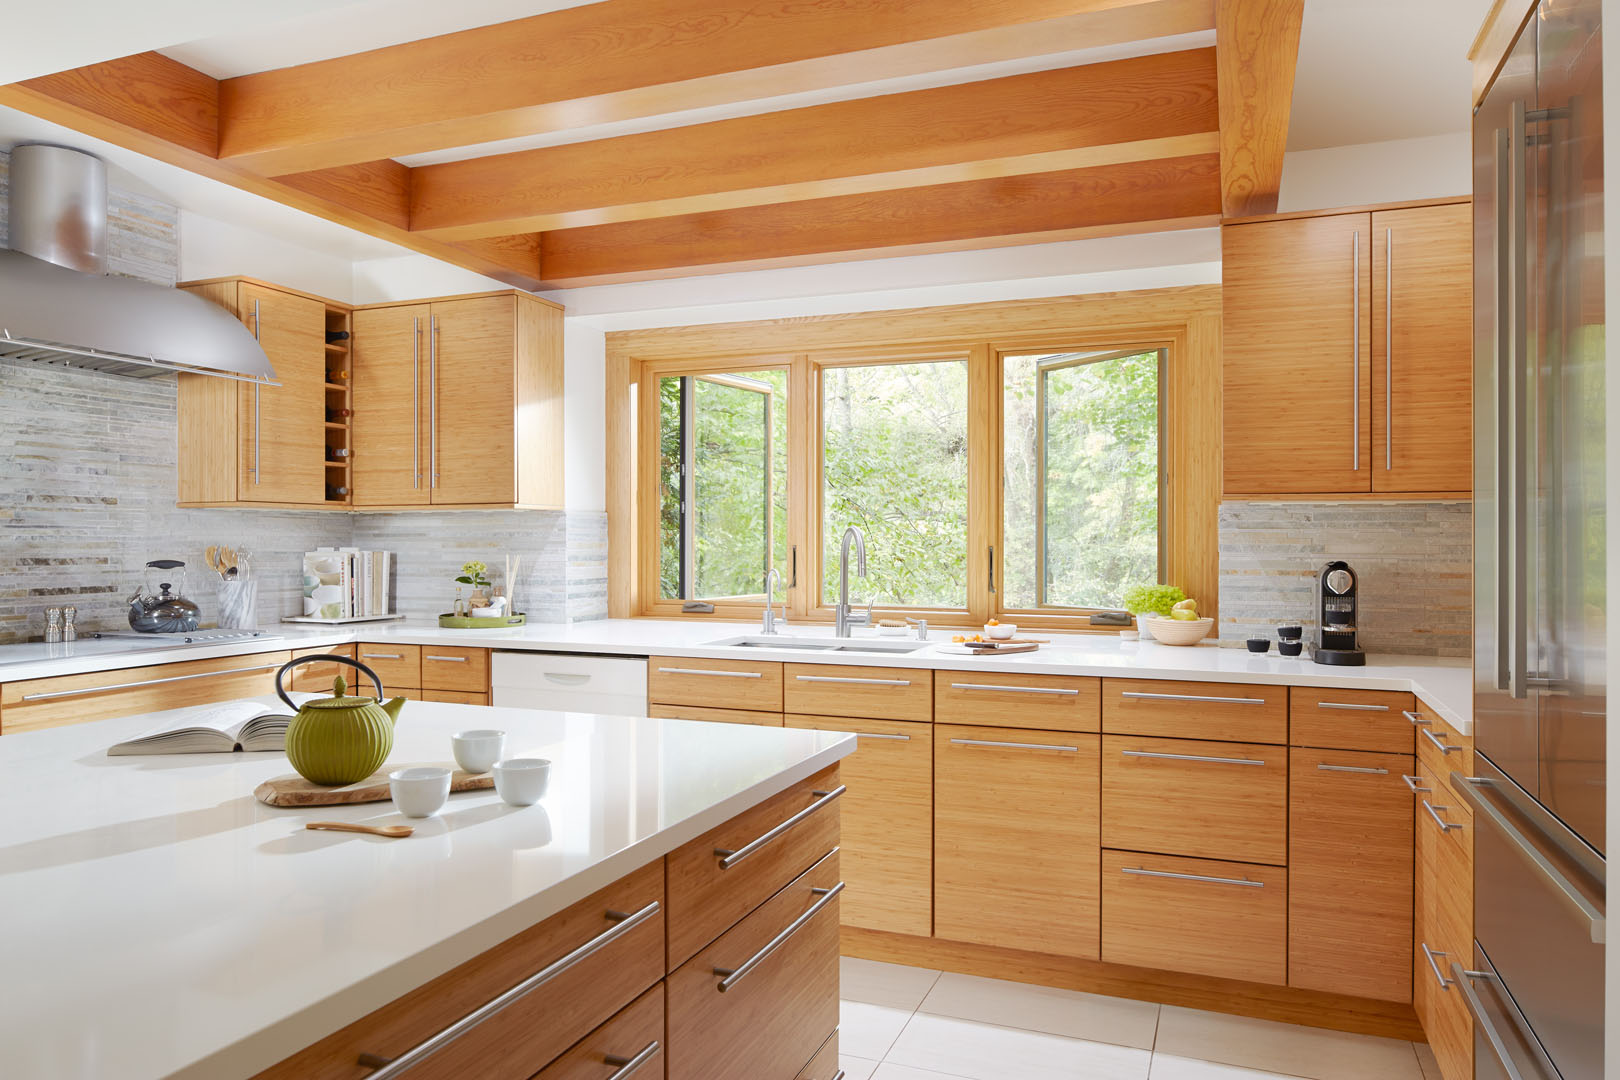 a kitchen with Renewal by Andersen casement windows letting in natural light